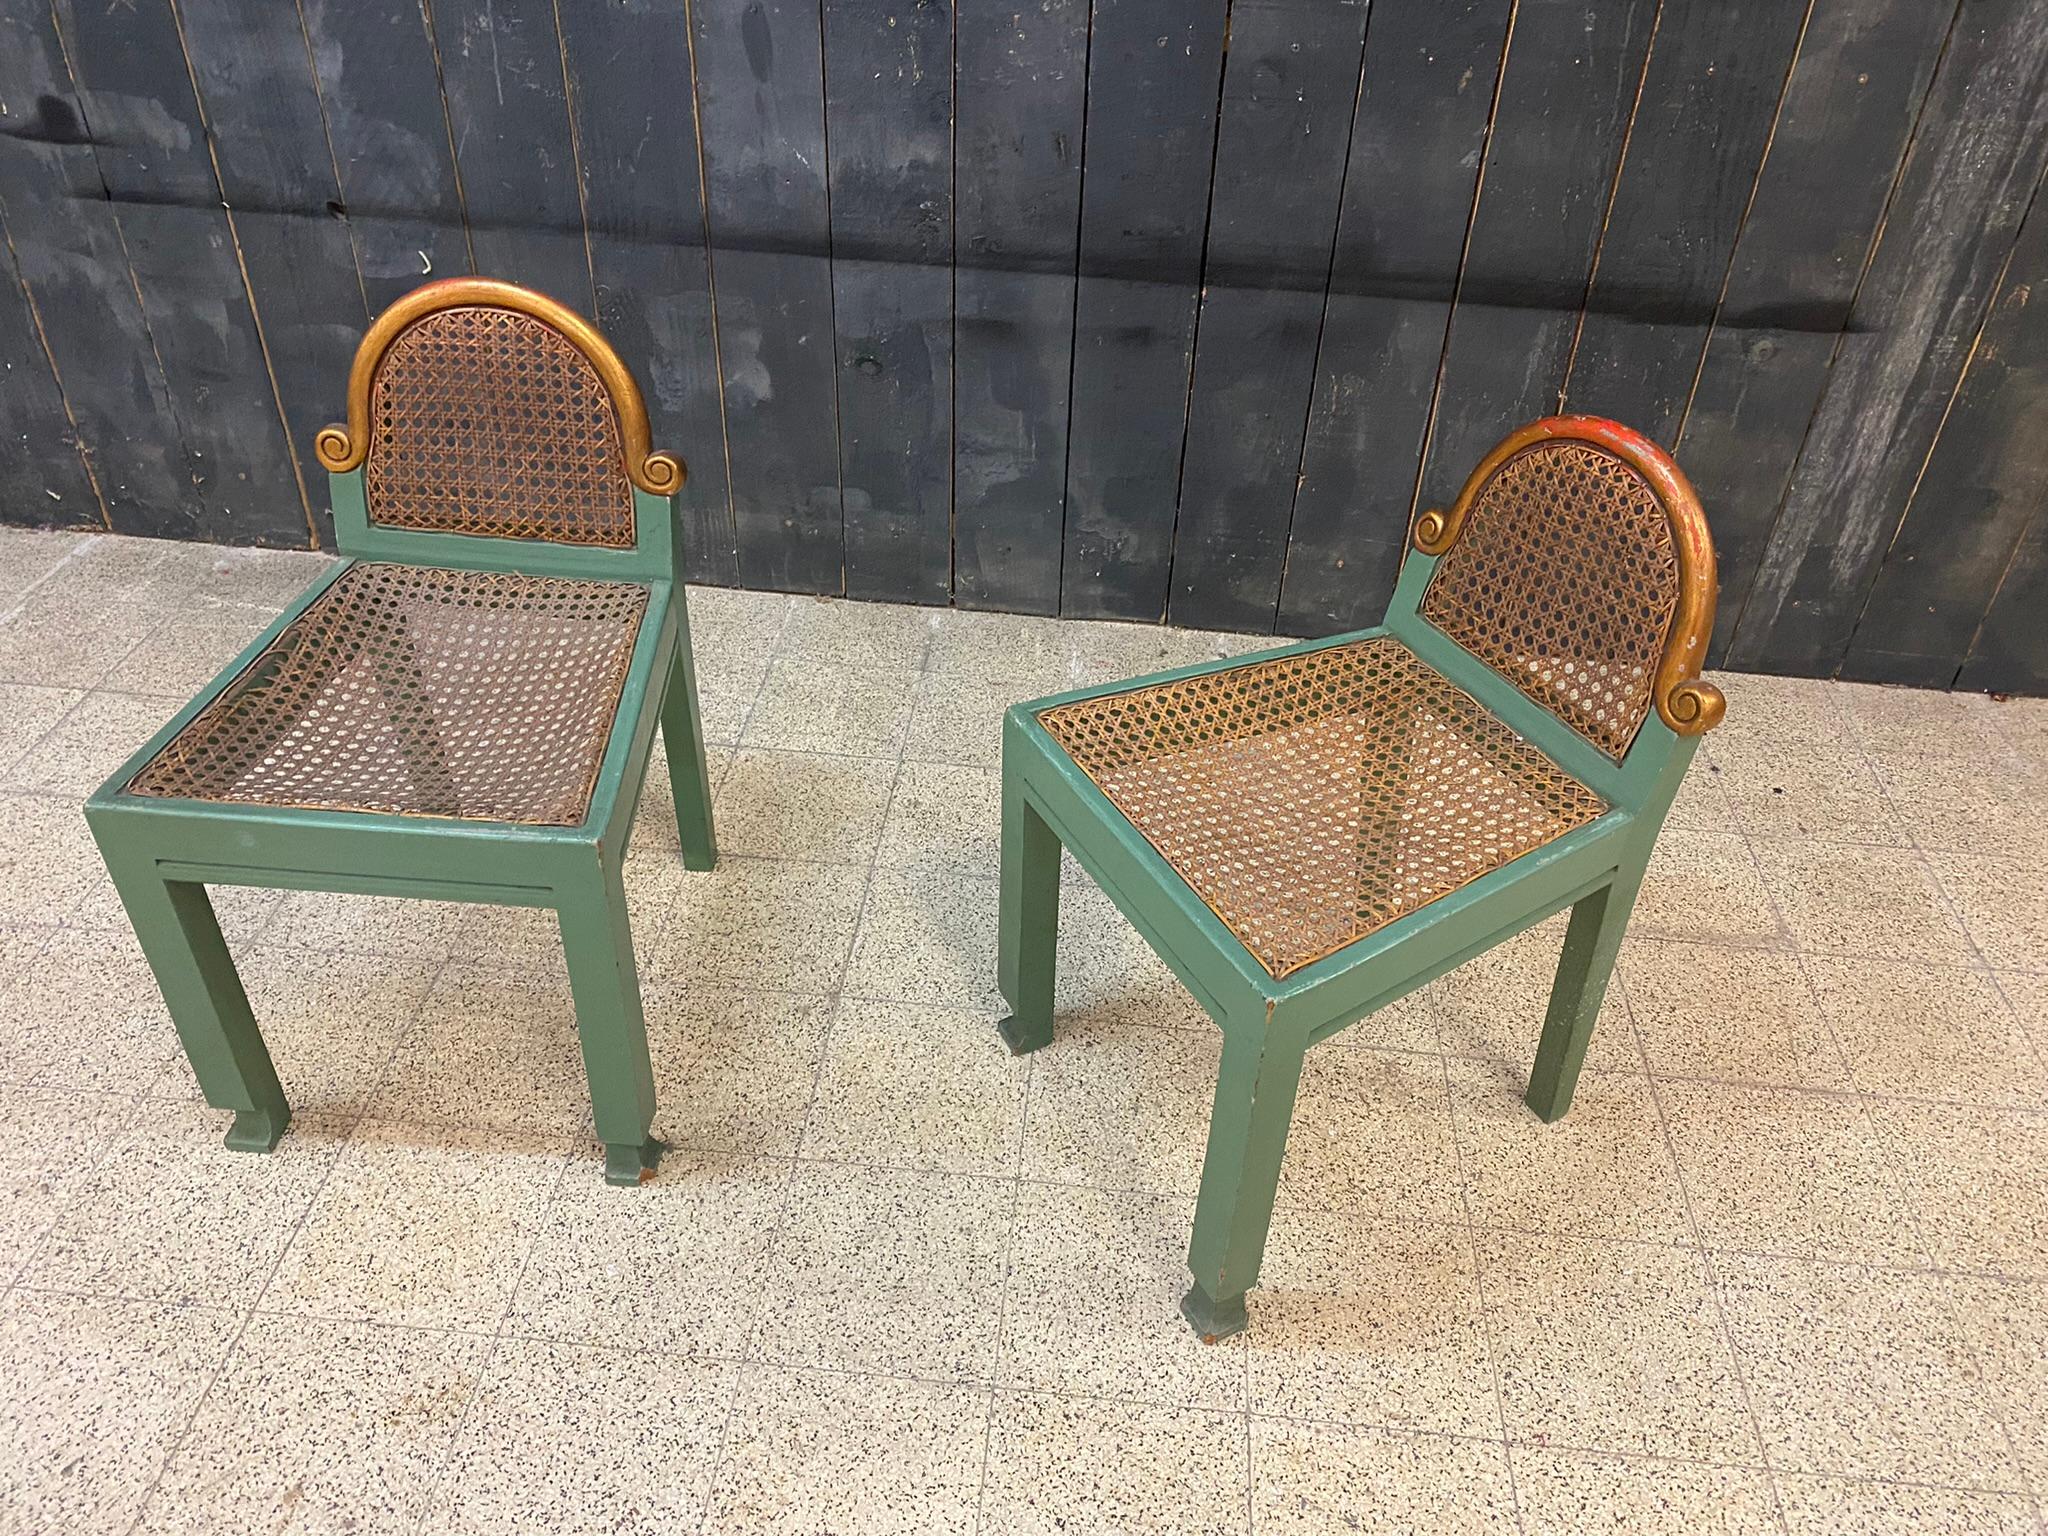 Pair of Small Modernist Chairs in Lacquered Beech and Cane, Belgium circa 1925 For Sale 1